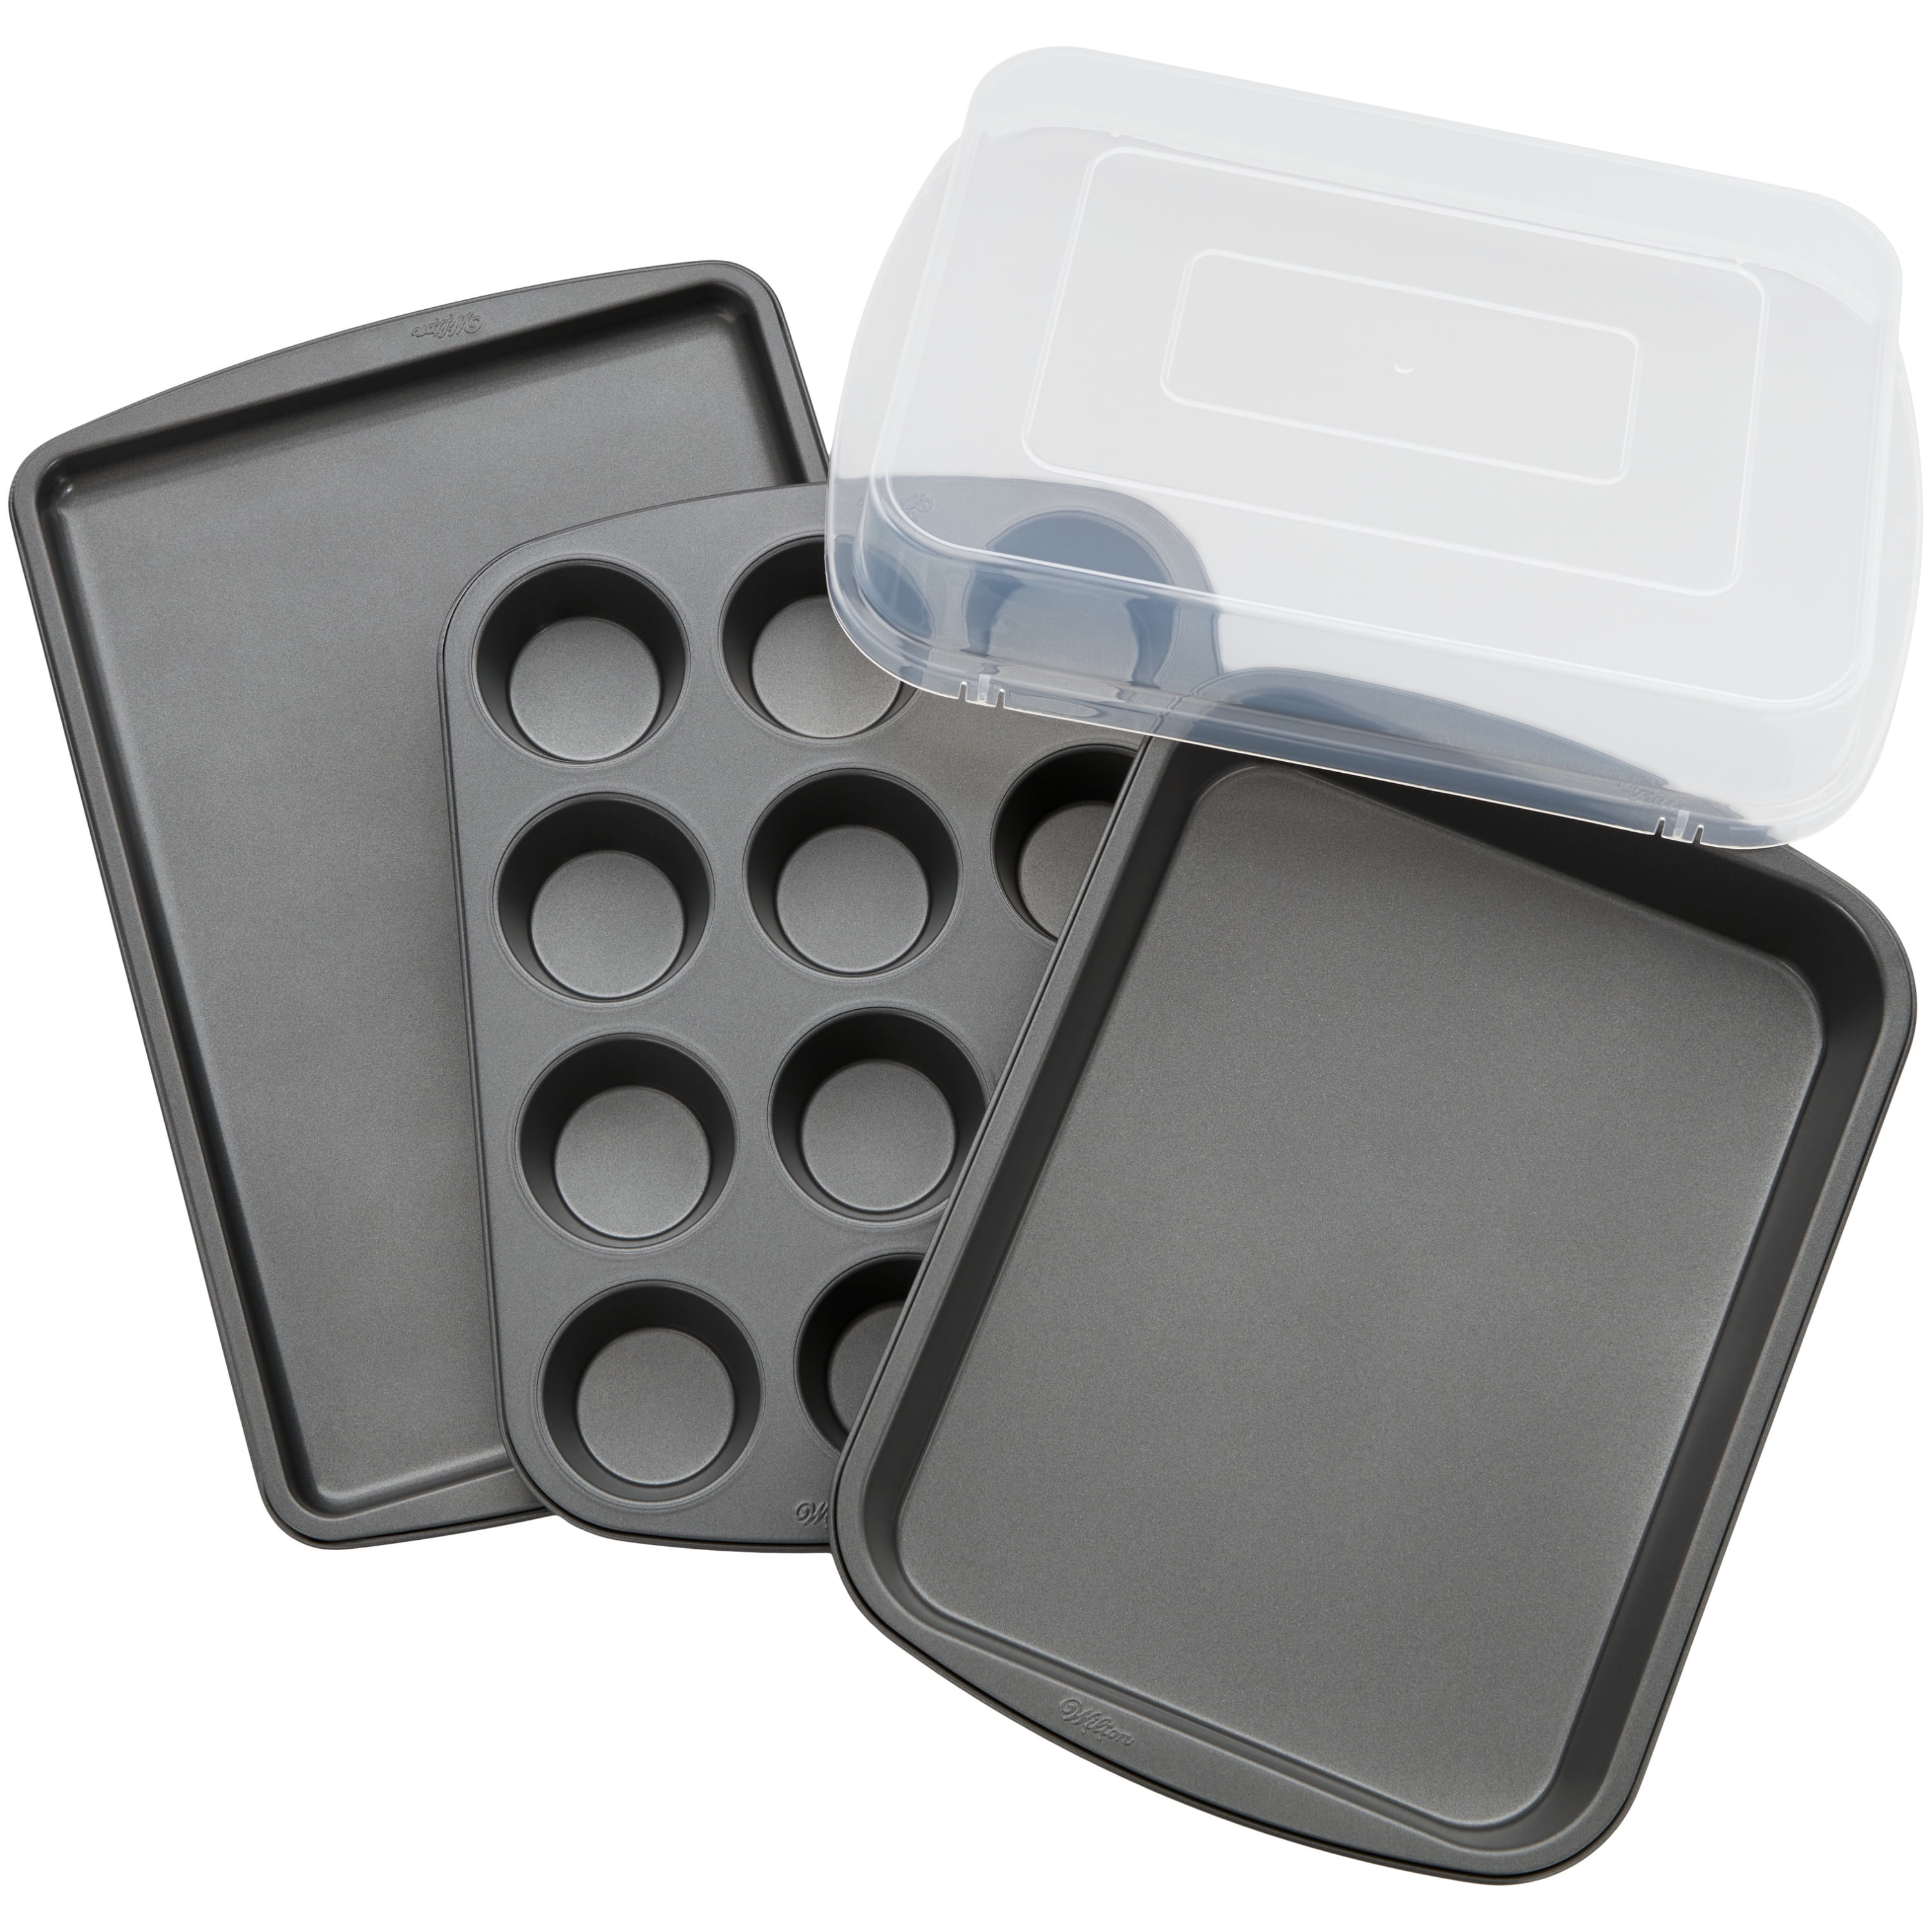 Wilton Perfect Results Oblong Cake Pan with Cover, Gray